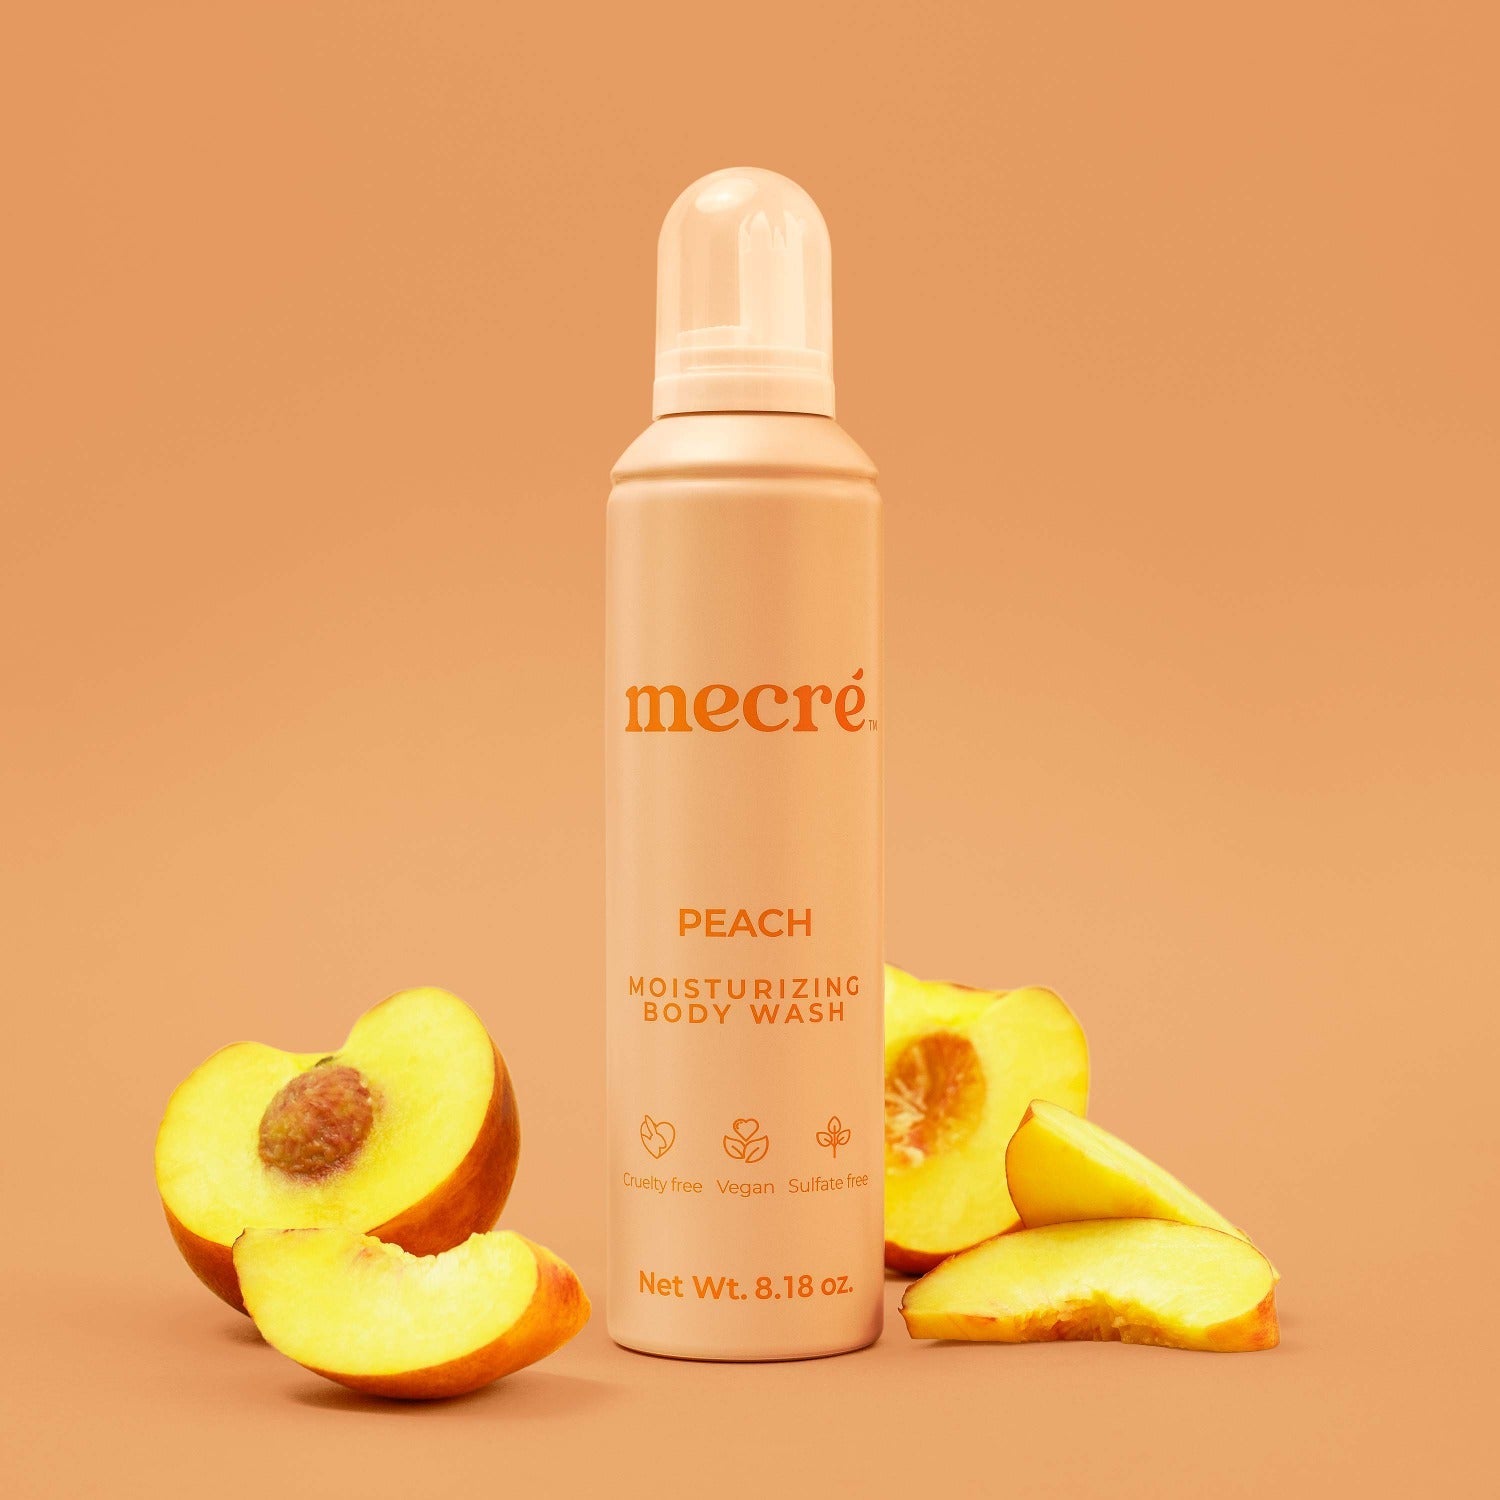 Mecré moisturizing body wash peach-scented bottle surrounded by peaches.